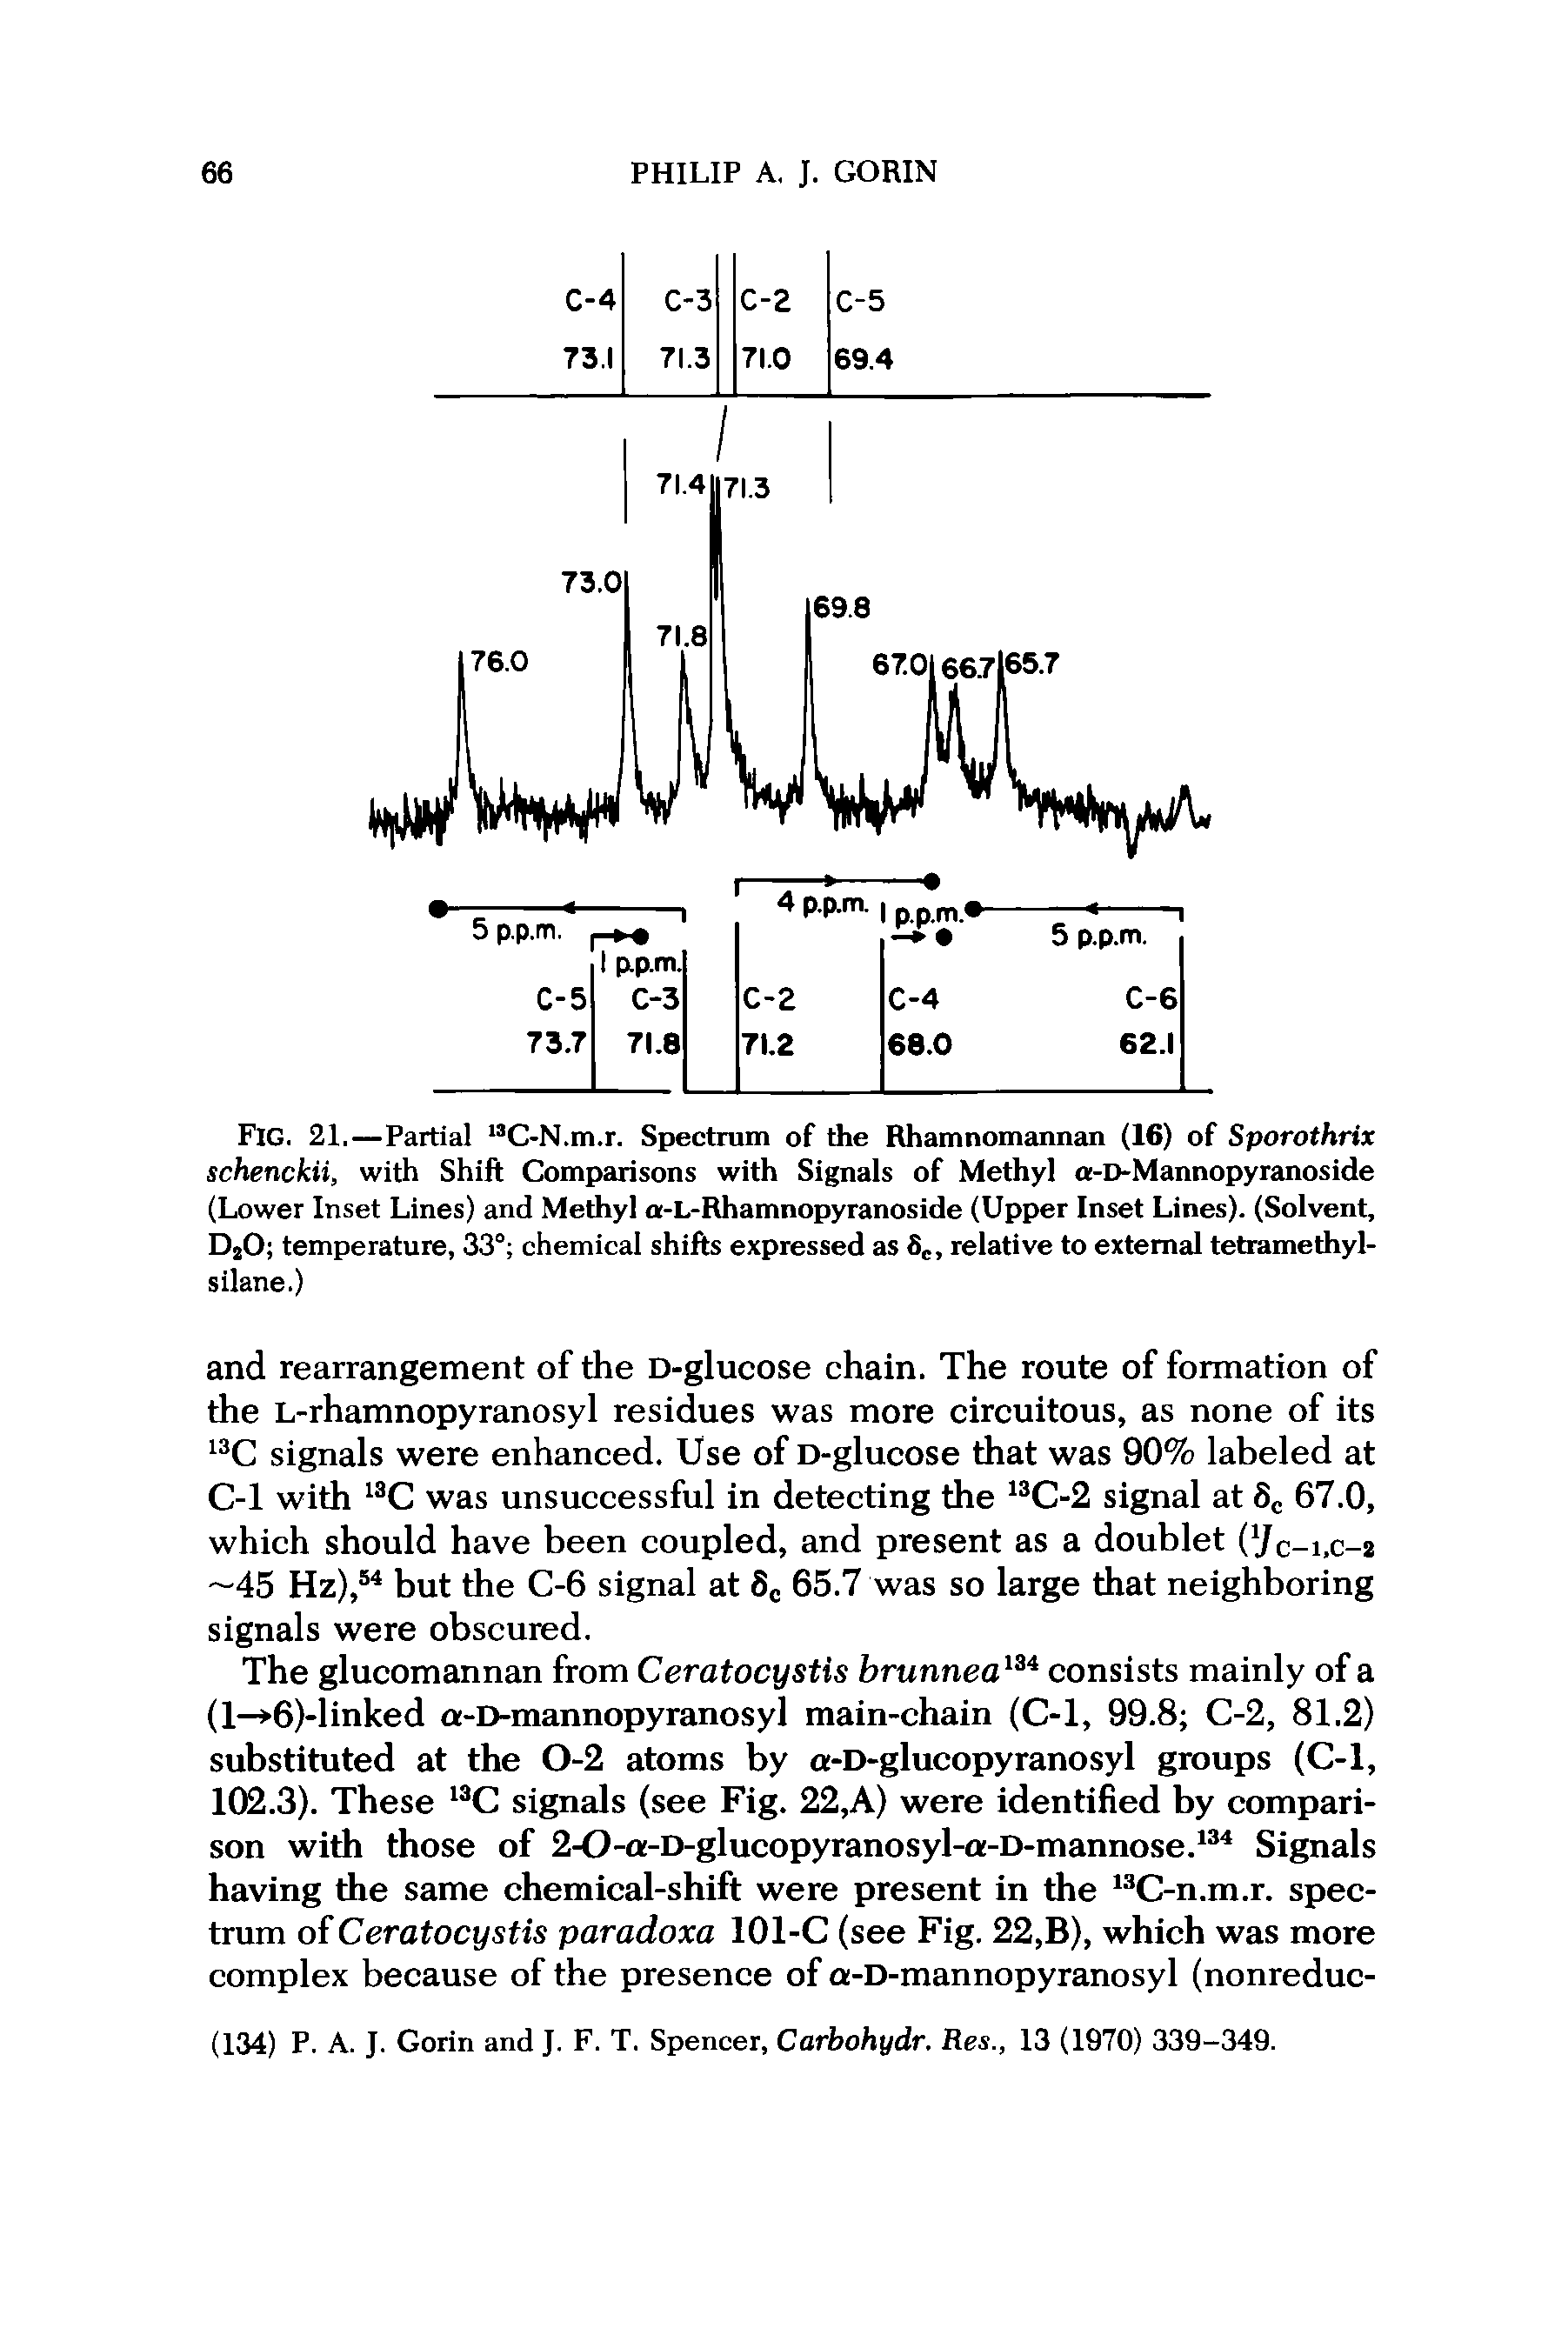 Fig. 21.—Partial 13C-N.m.r. Spectrum of the Rhamnomannan (16) of Sporothrix schenckii, with Shift Comparisons with Signals of Methyl a-D-Mannopyranoside (Lower Inset Lines) and Methyl a-L-Rhamnopyranoside (Upper Inset Lines). (Solvent, D20 temperature, 33° chemical shifts expressed as 8C, relative to external tetramethyl-silane.)...